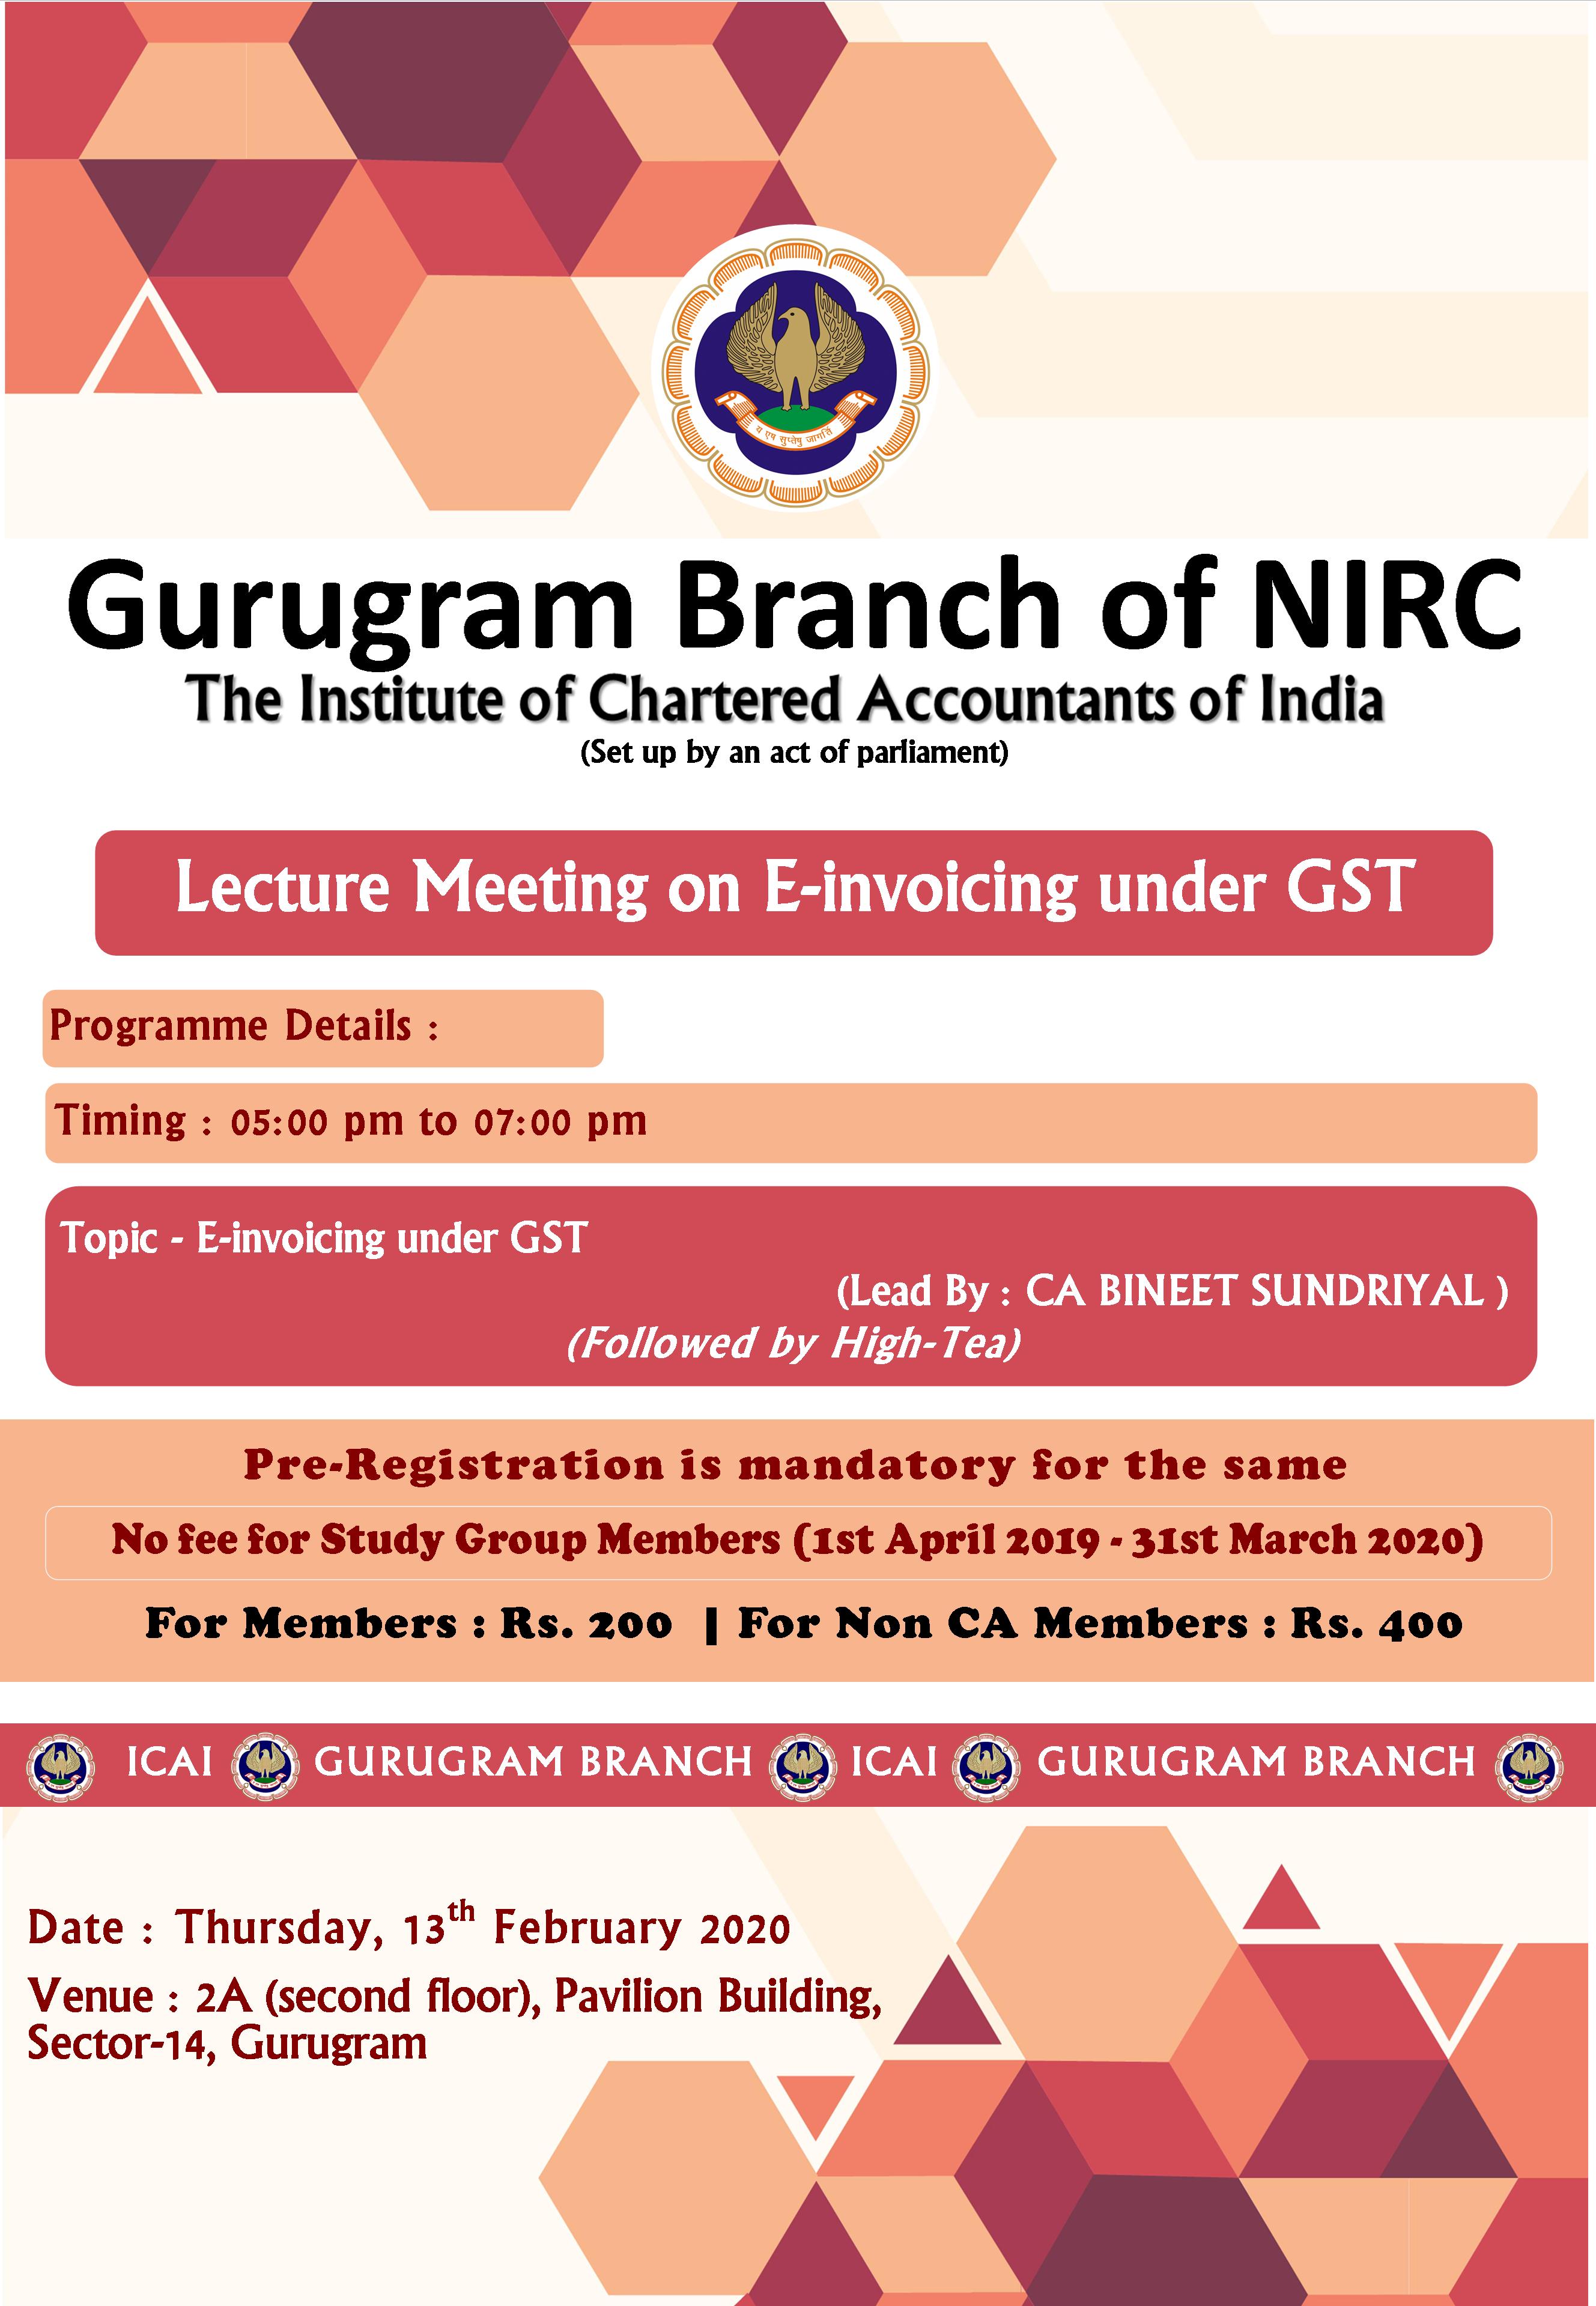 Lecture Meeting on E-invoicing under GST